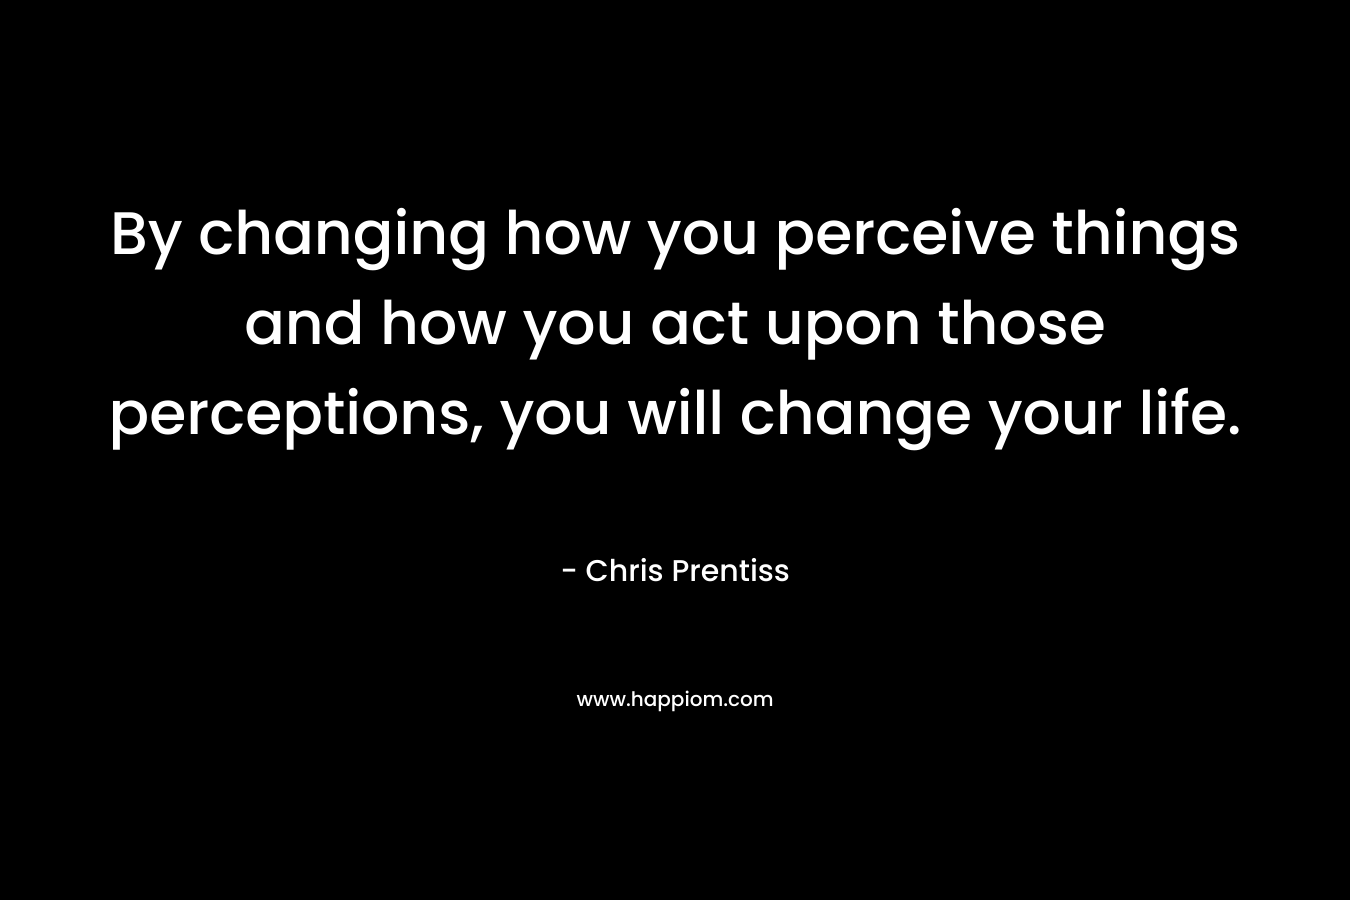 By changing how you perceive things and how you act upon those perceptions, you will change your life.